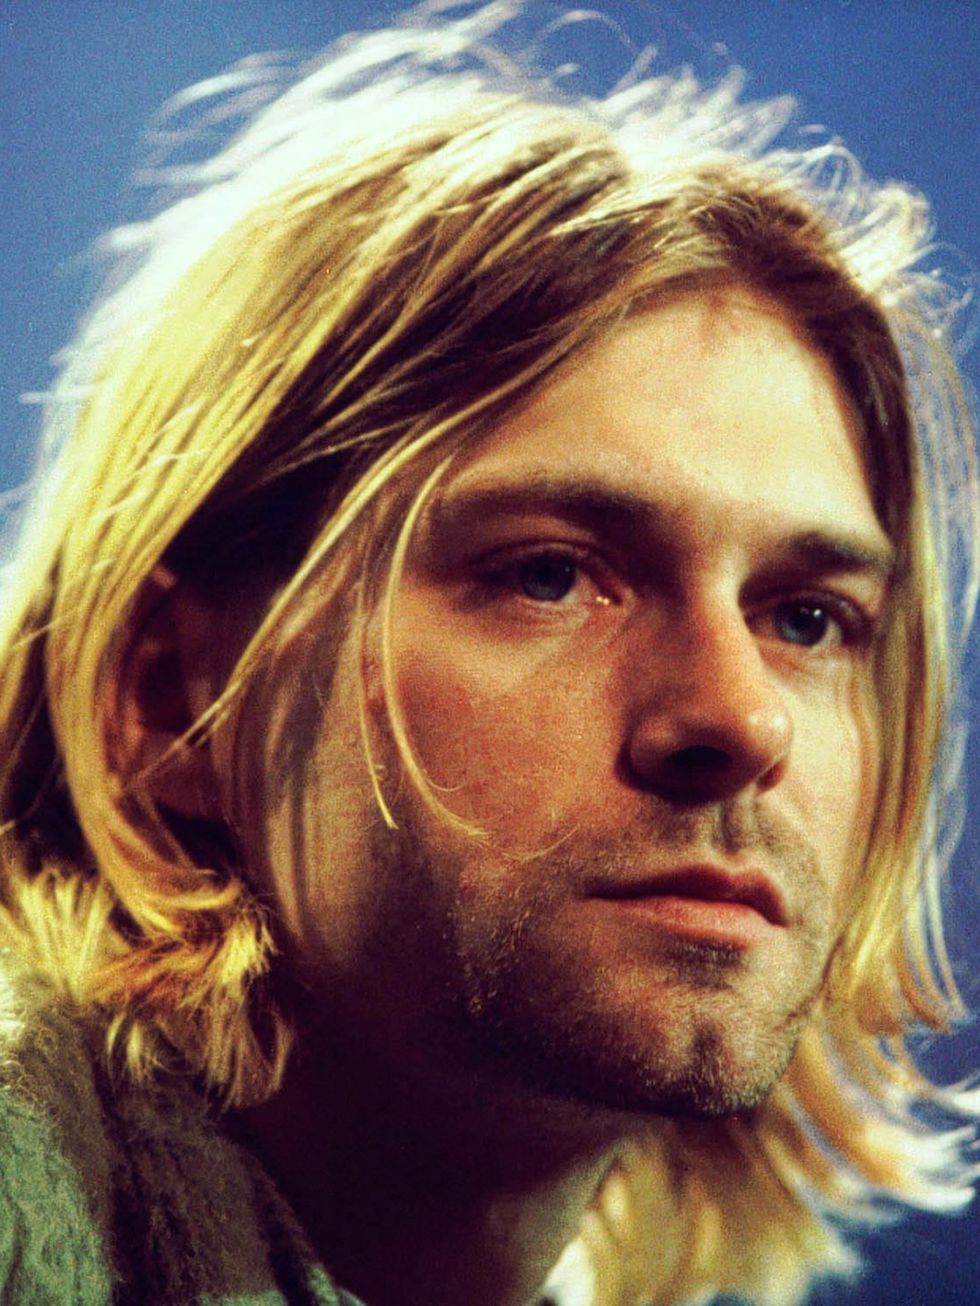 <p>FILM: Kurt Cobain: Montage of Heck</p>

<p>Compelling. Raw. Restlessly creative. And, ultimately, tragic. The same adjectives can be applied to both Kurt Cobain and his music, which came to define the 1990s grunge era. And here, for the first time, is 